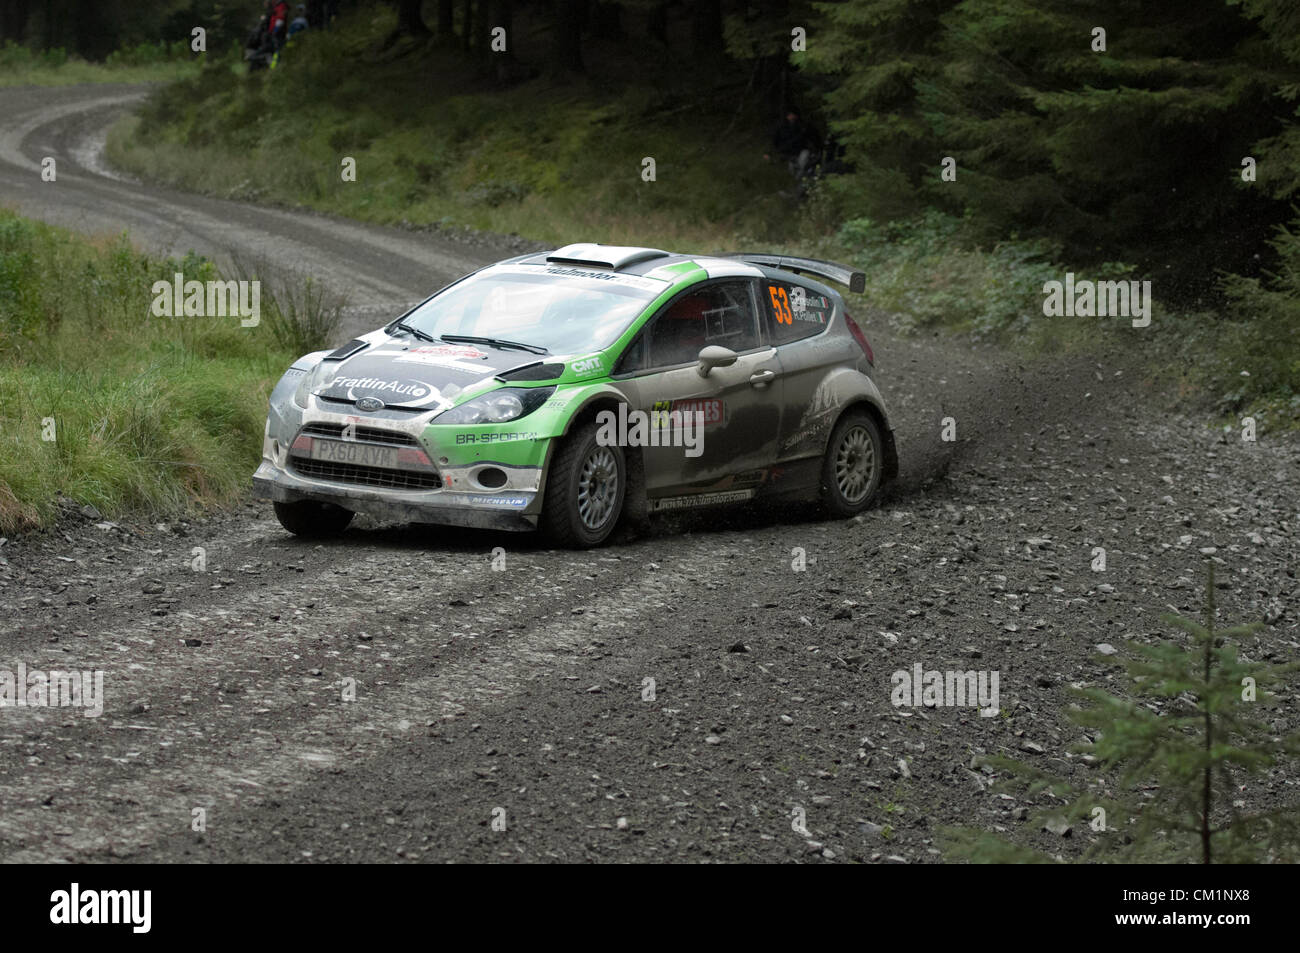 14th September 2012 - Devils Bridge - Mid Wales : WRC Wales Rally GB SS6 Myherin stage :  Edoardo Bresolin and co driver Rudy Pollet of Italy in their Ford Fiesta RRC. Stock Photo